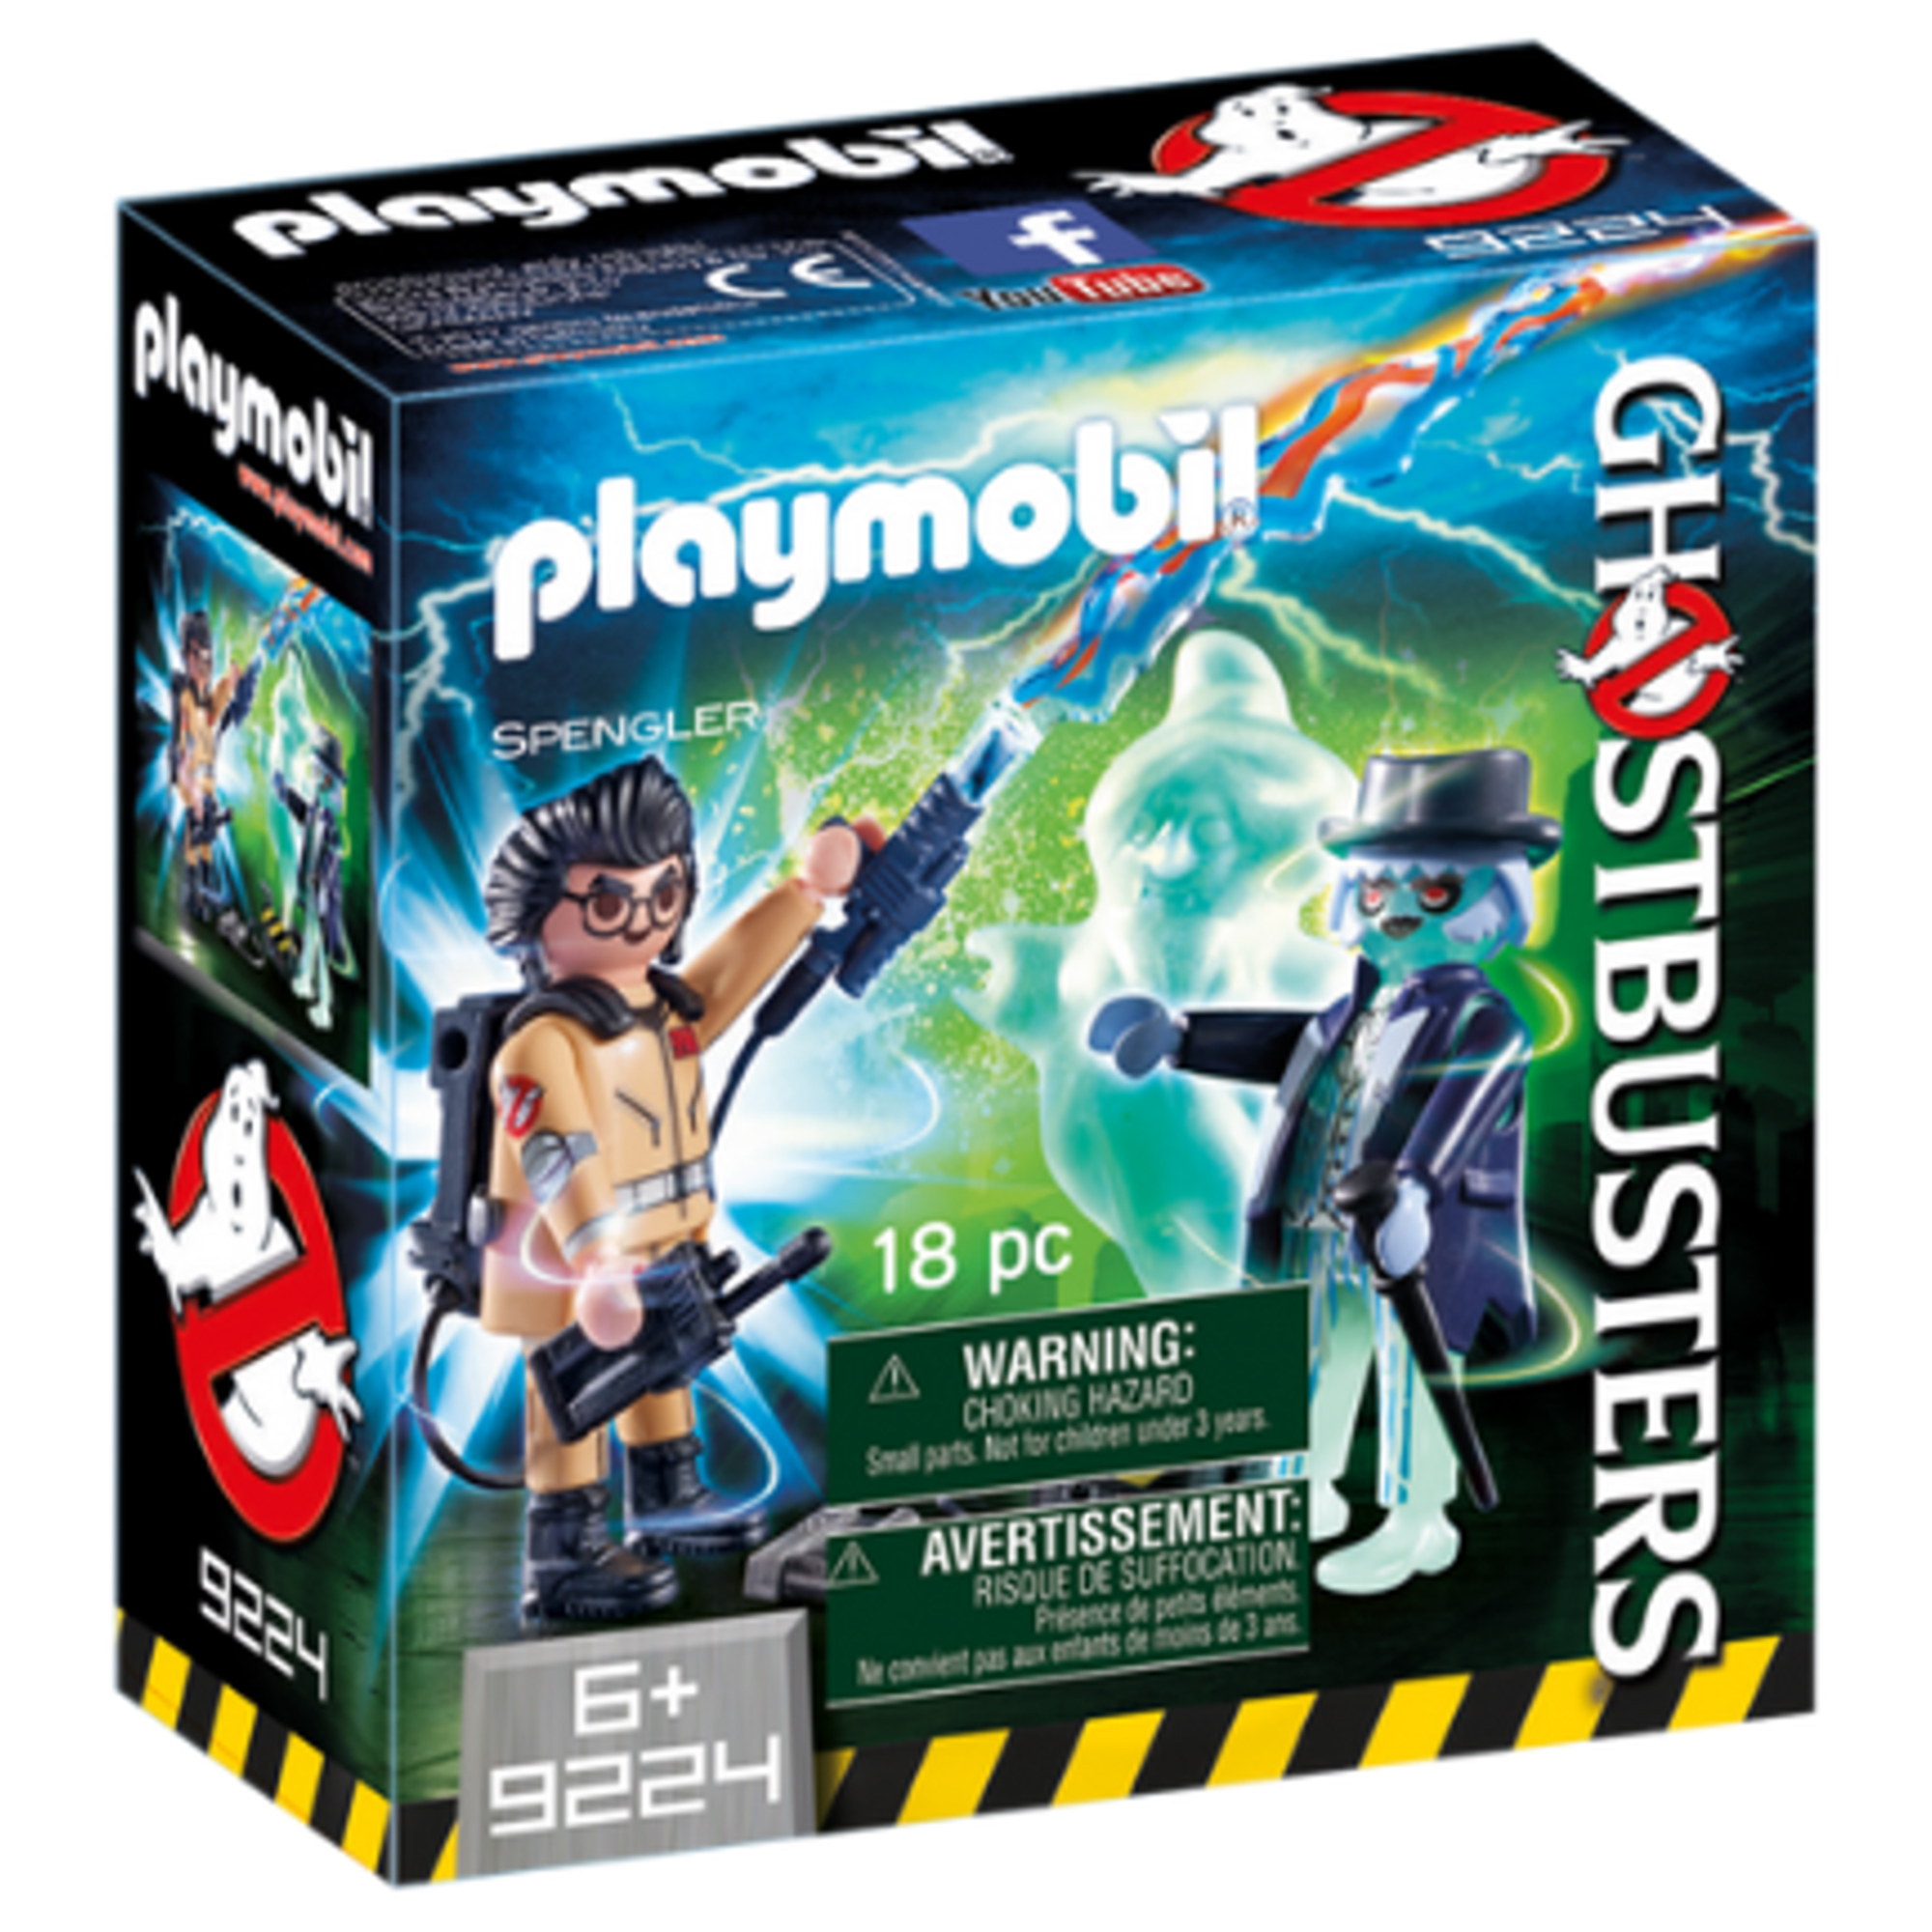 Buy cheap Playmobil Ghostbusters at 